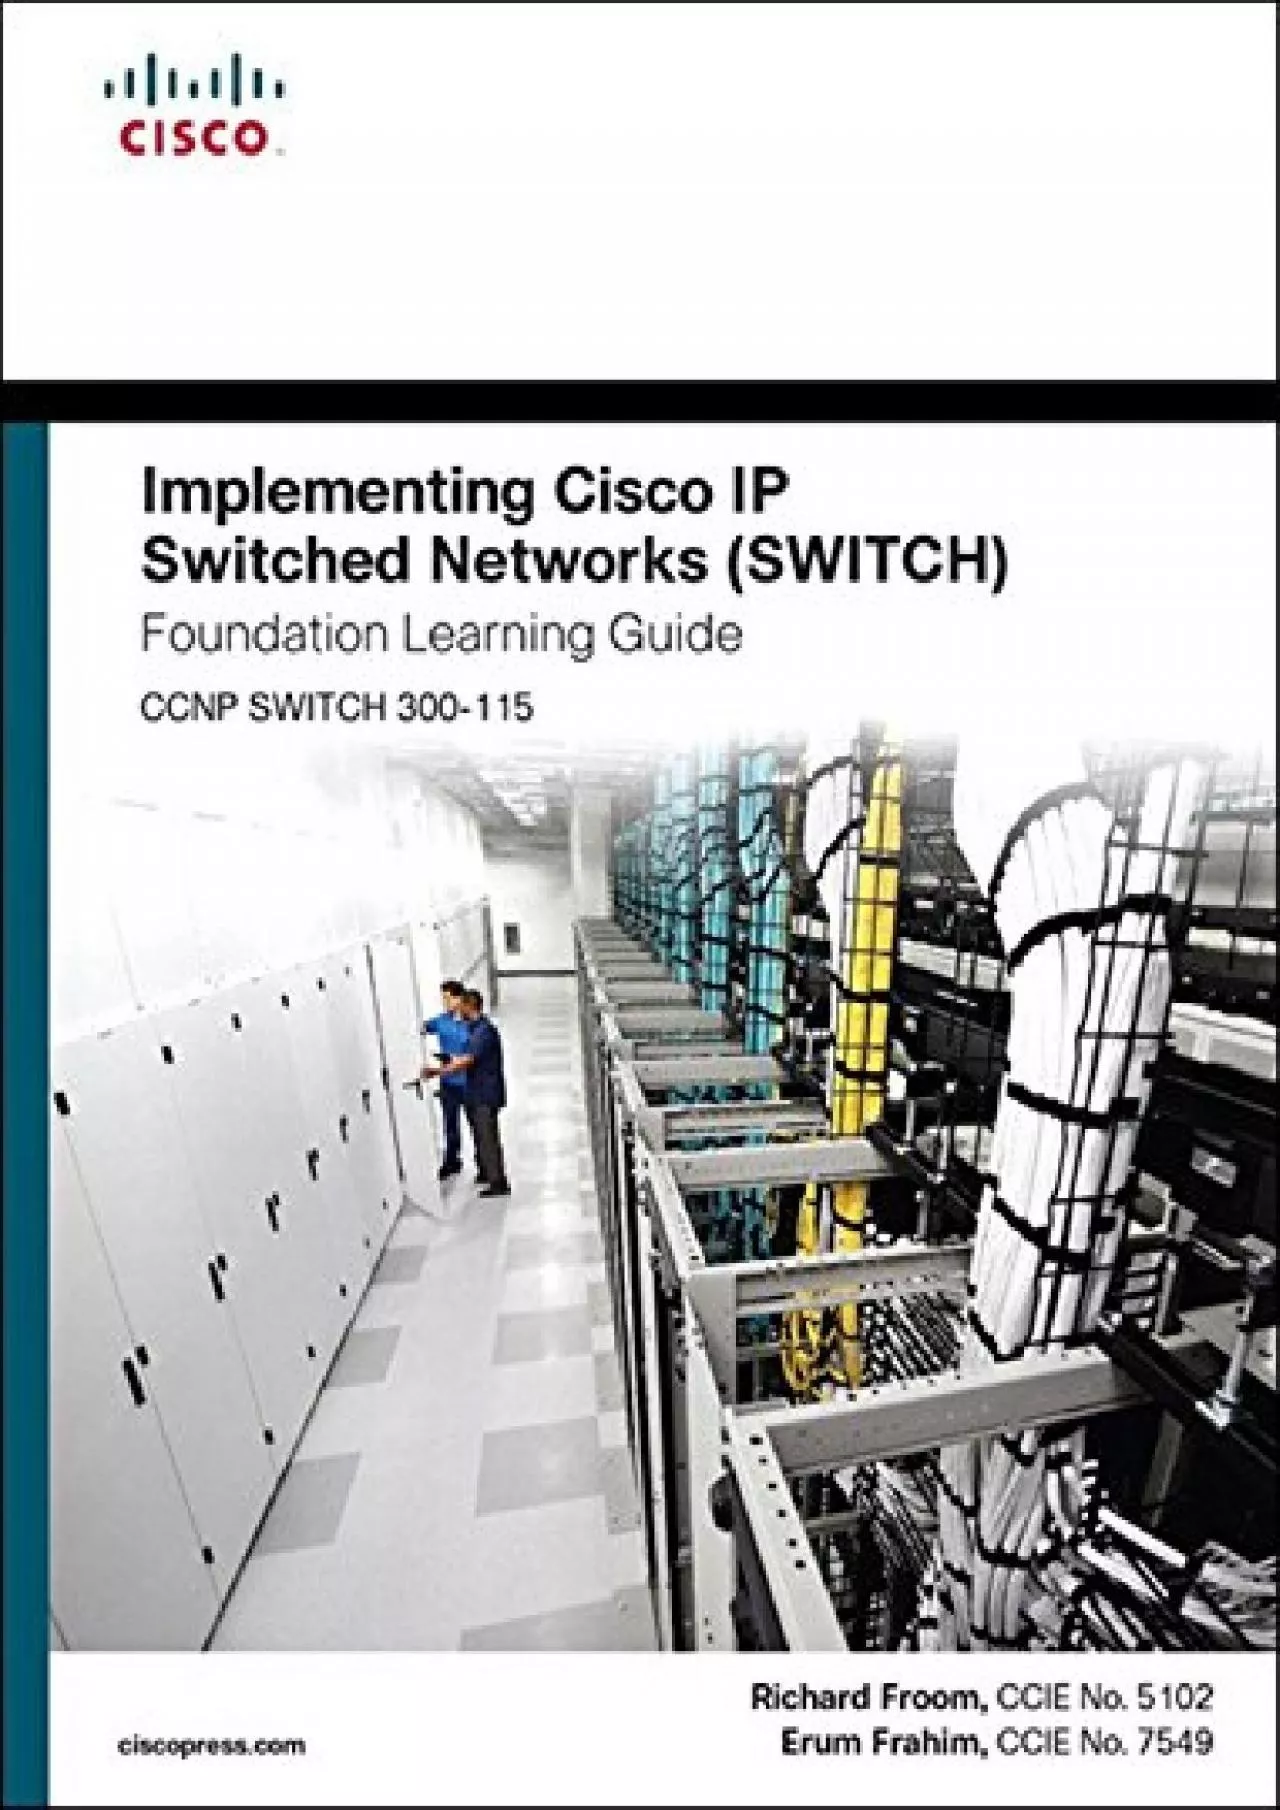 [DOWLOAD]-Implementing Cisco IP Switched Networks (SWITCH) Foundation Learning Guide: